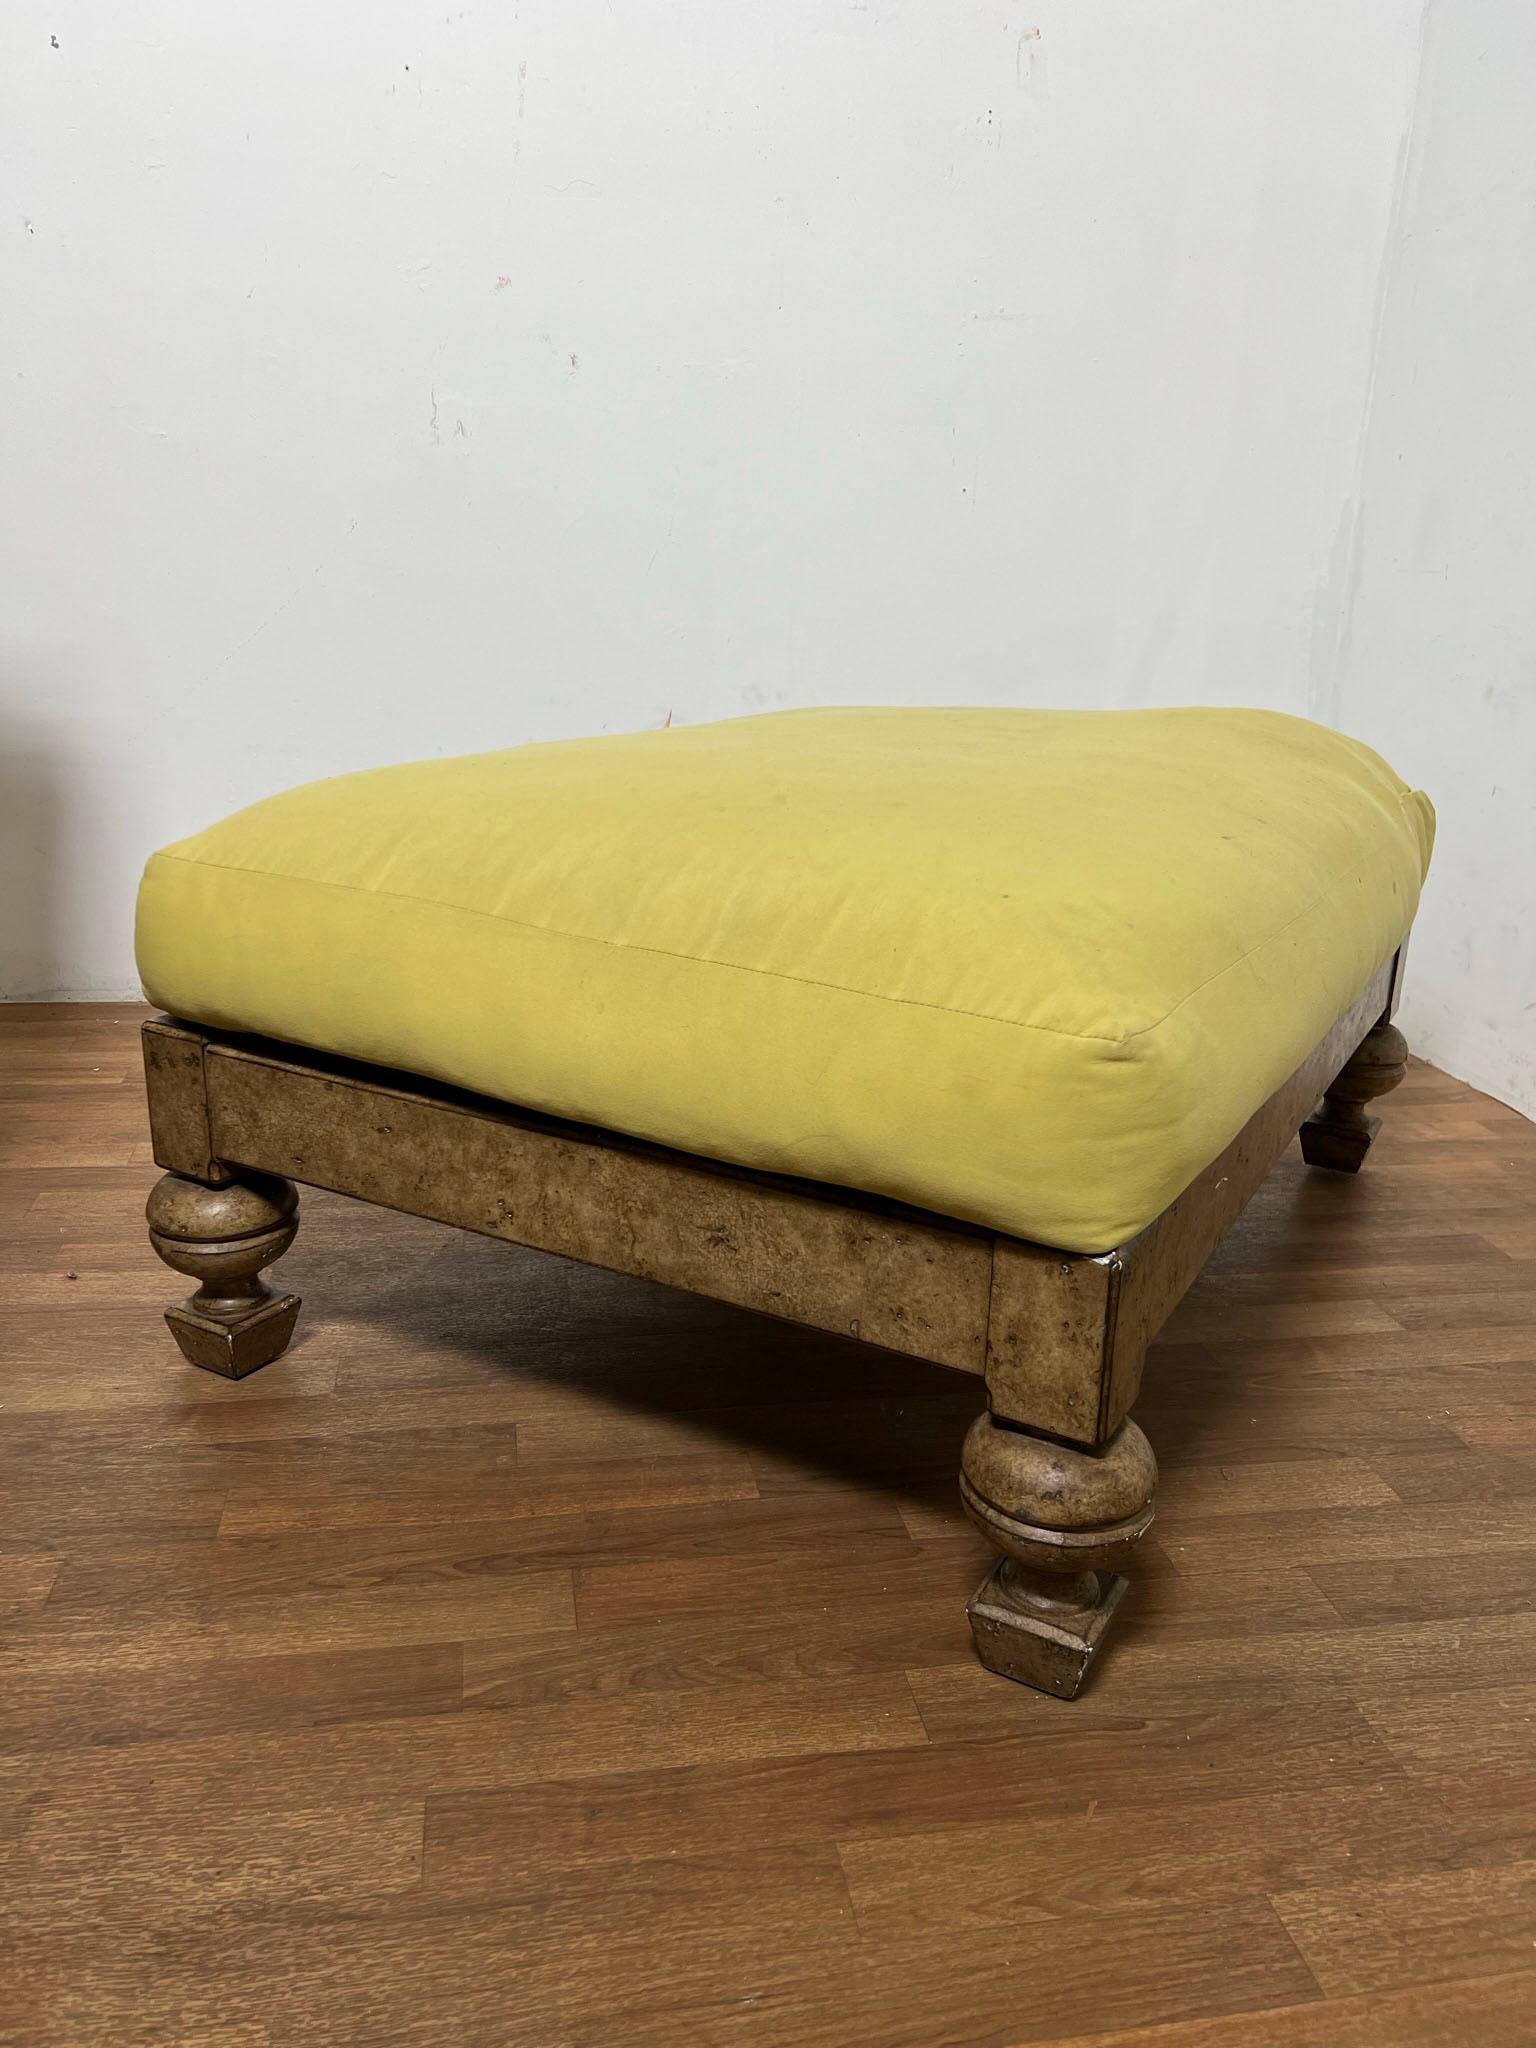 Marge Carson Oversized Burl Wood and Cane Lounge With Ottoman Circa 1980s For Sale 7